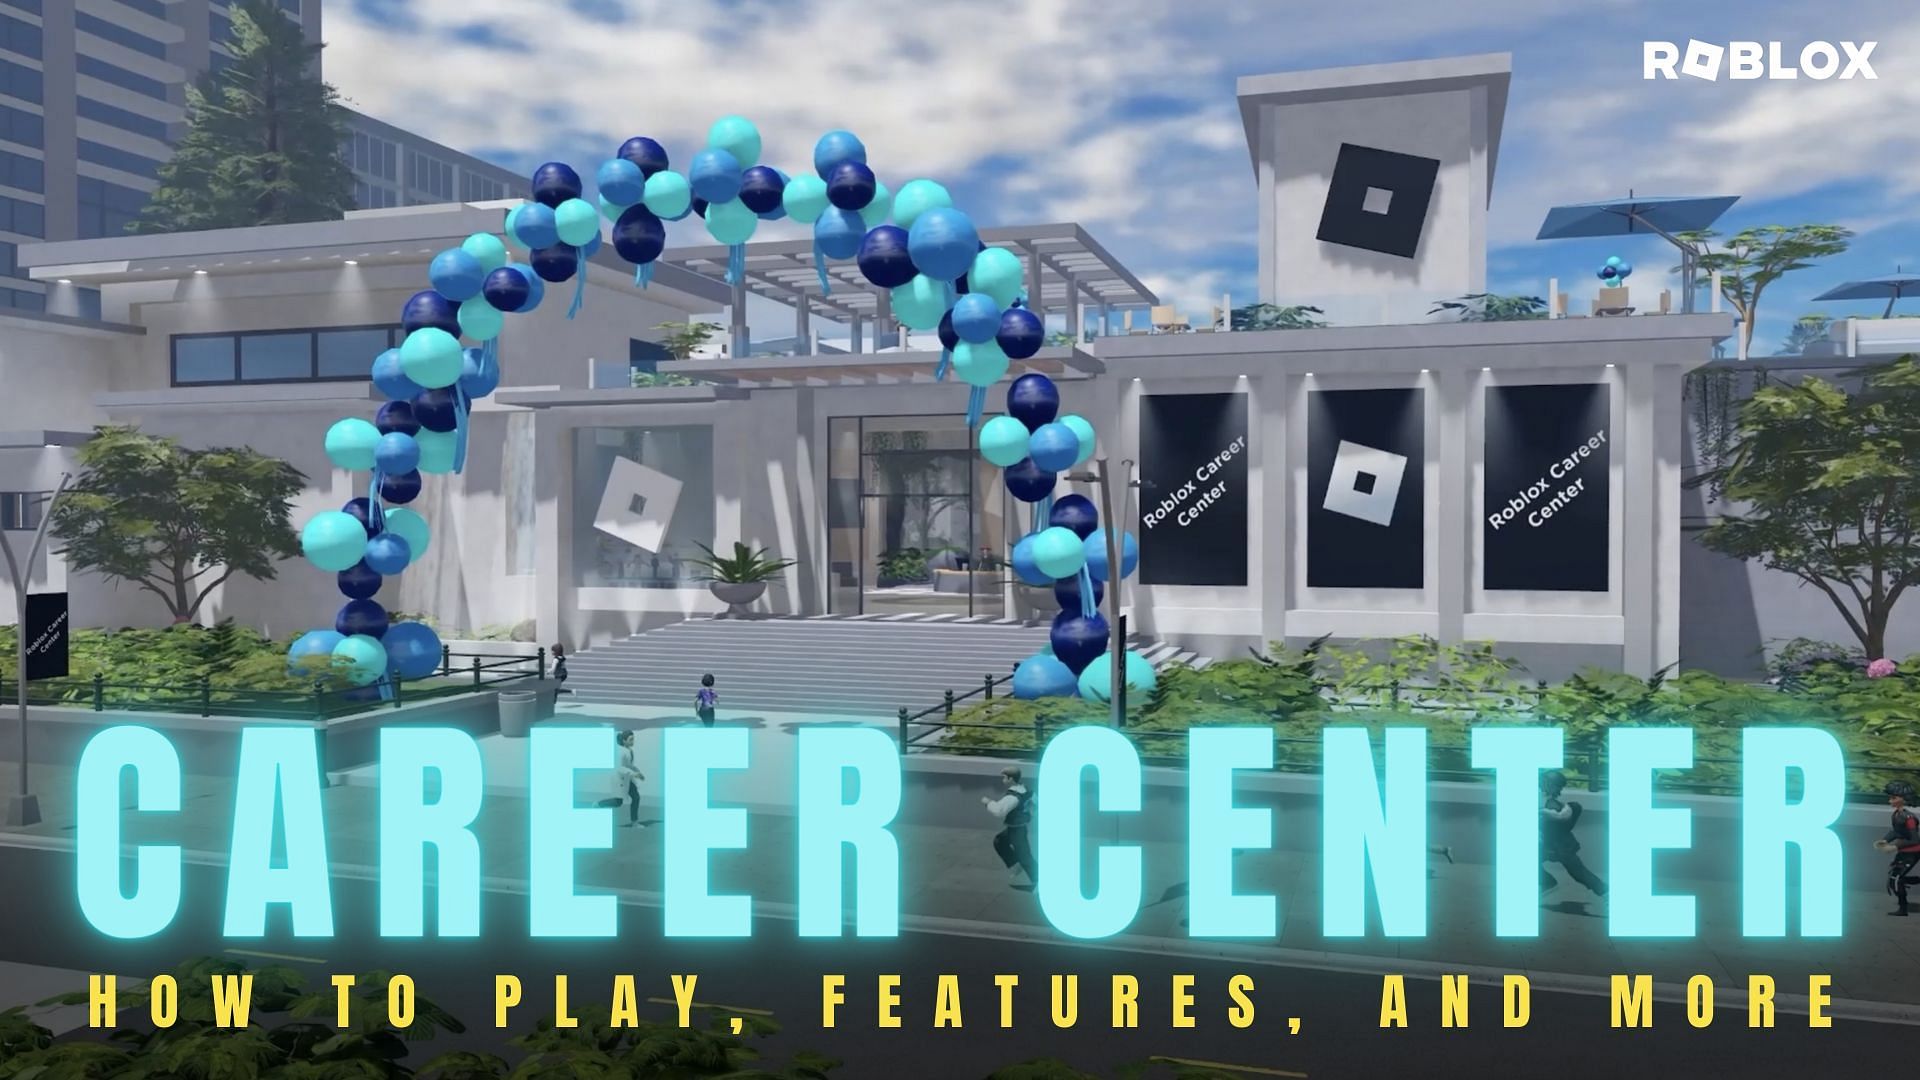 Roblox Career Center: How to play, features, and more